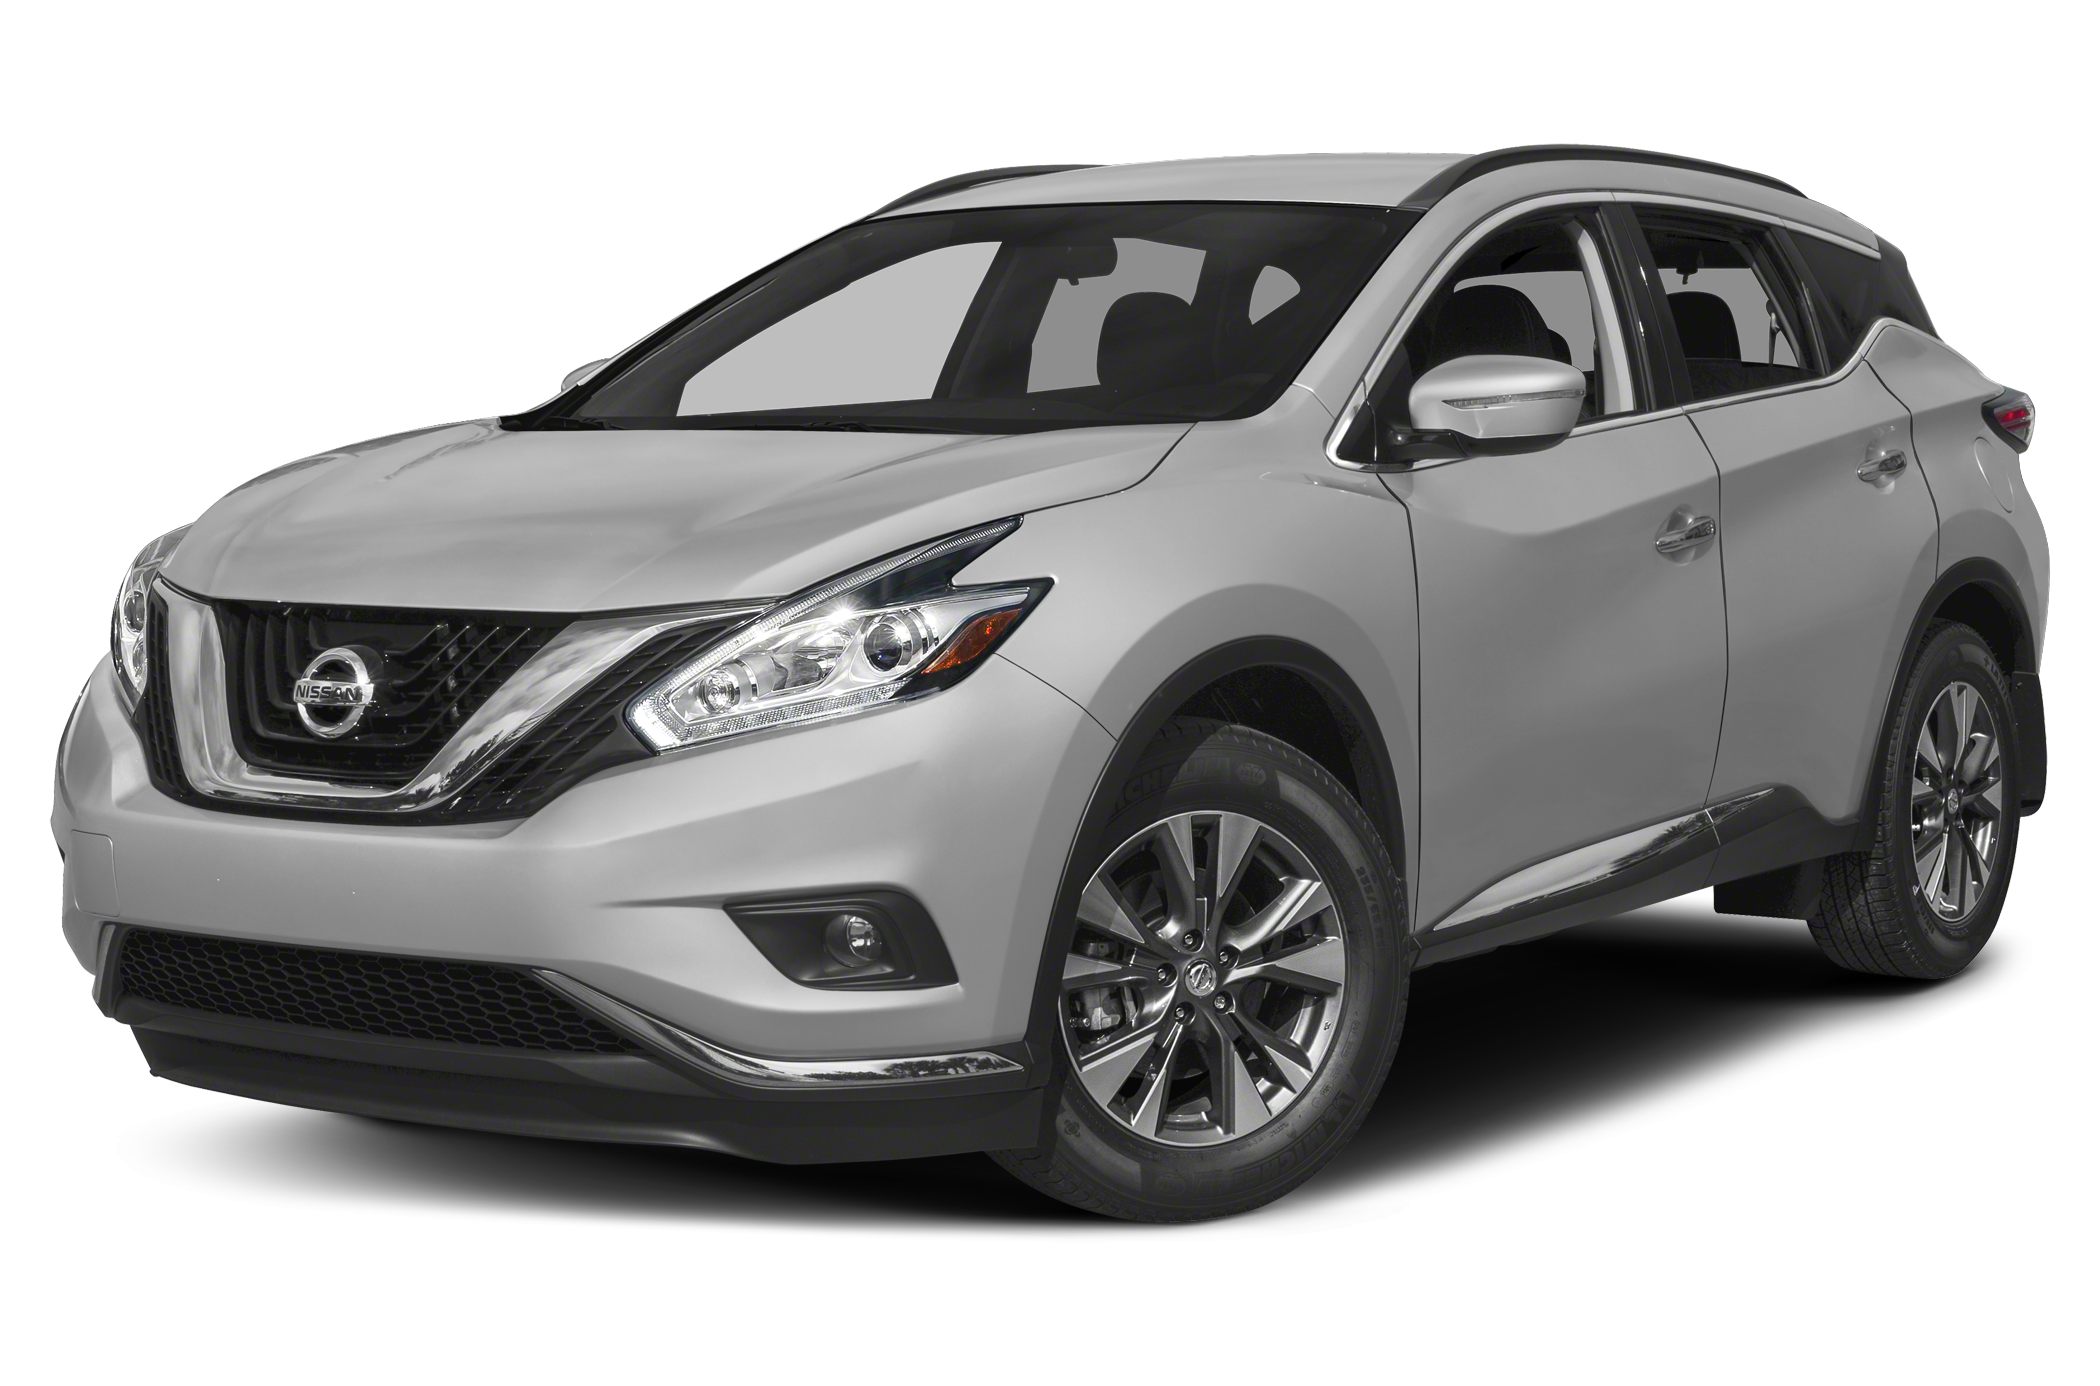 2015 Nissan Murano Sv 4dr All Wheel Drive Pictures